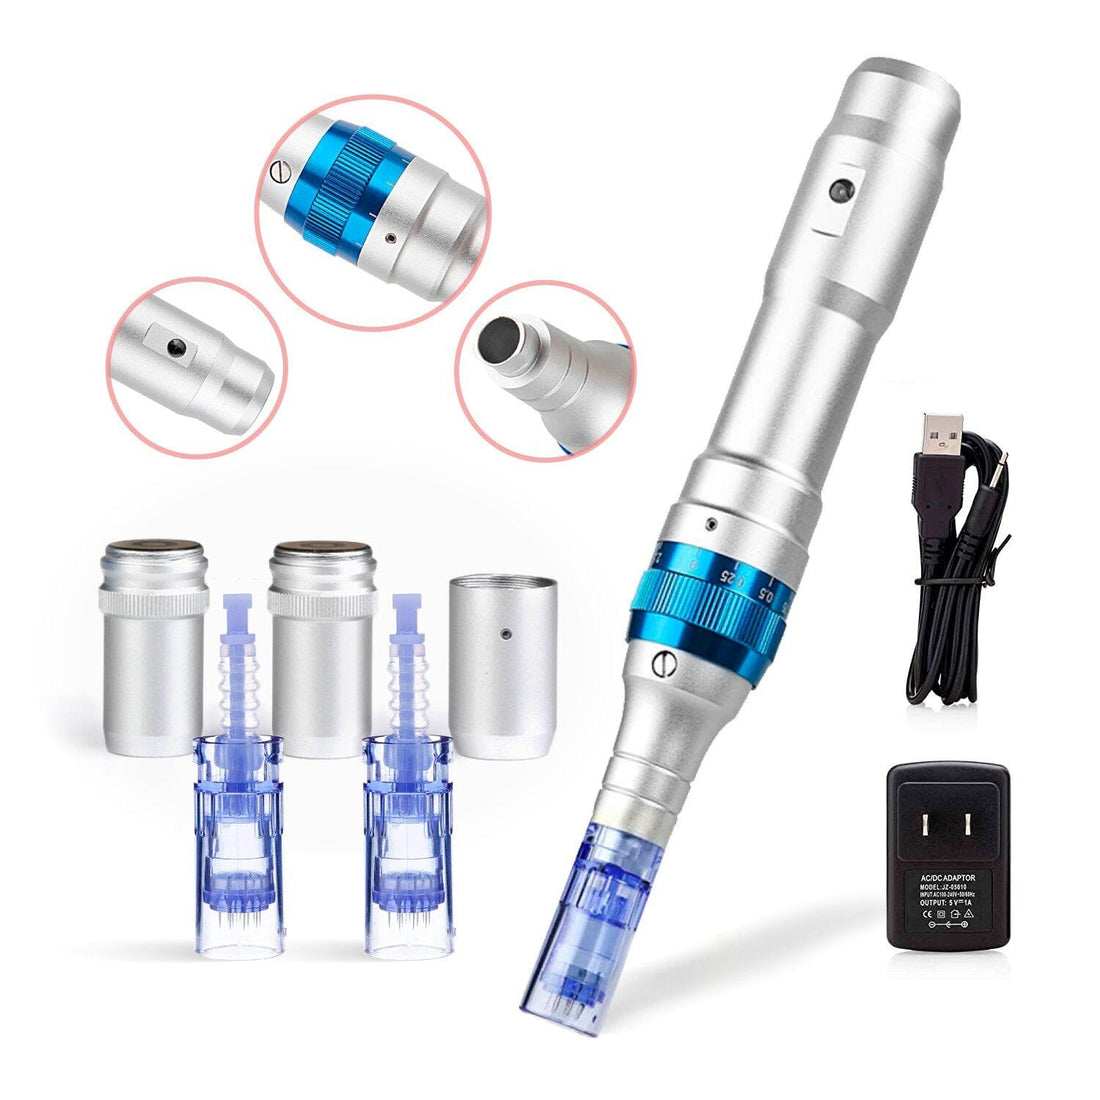 "30% Discount on Open Box" BRÜUN BEAUTY Dr. Pen Ultima A6 - Microneedling Electric Wireless Professional Skincare Kit with Cartridges - 2 X 12 pins (Maximum length of Needles 0.25mm) SH-Dr pen - A6 Dr Pen 